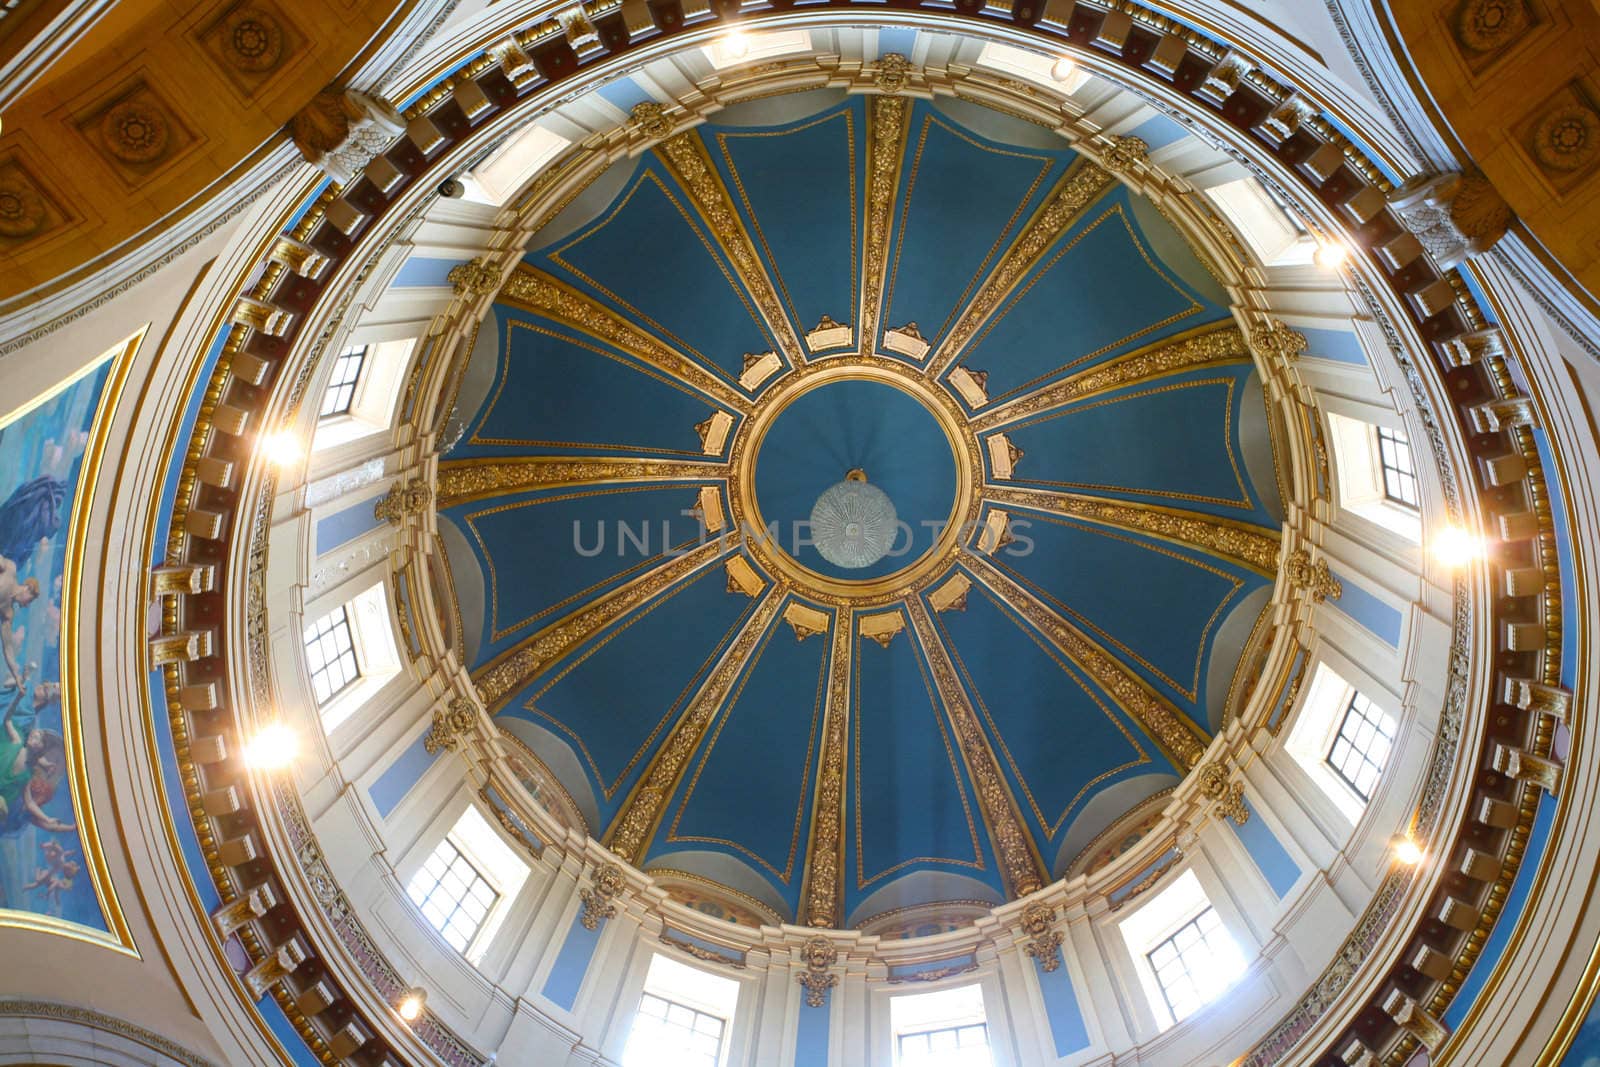 Interior of capitol dome in St. Paul, Mn by jarenwicklund